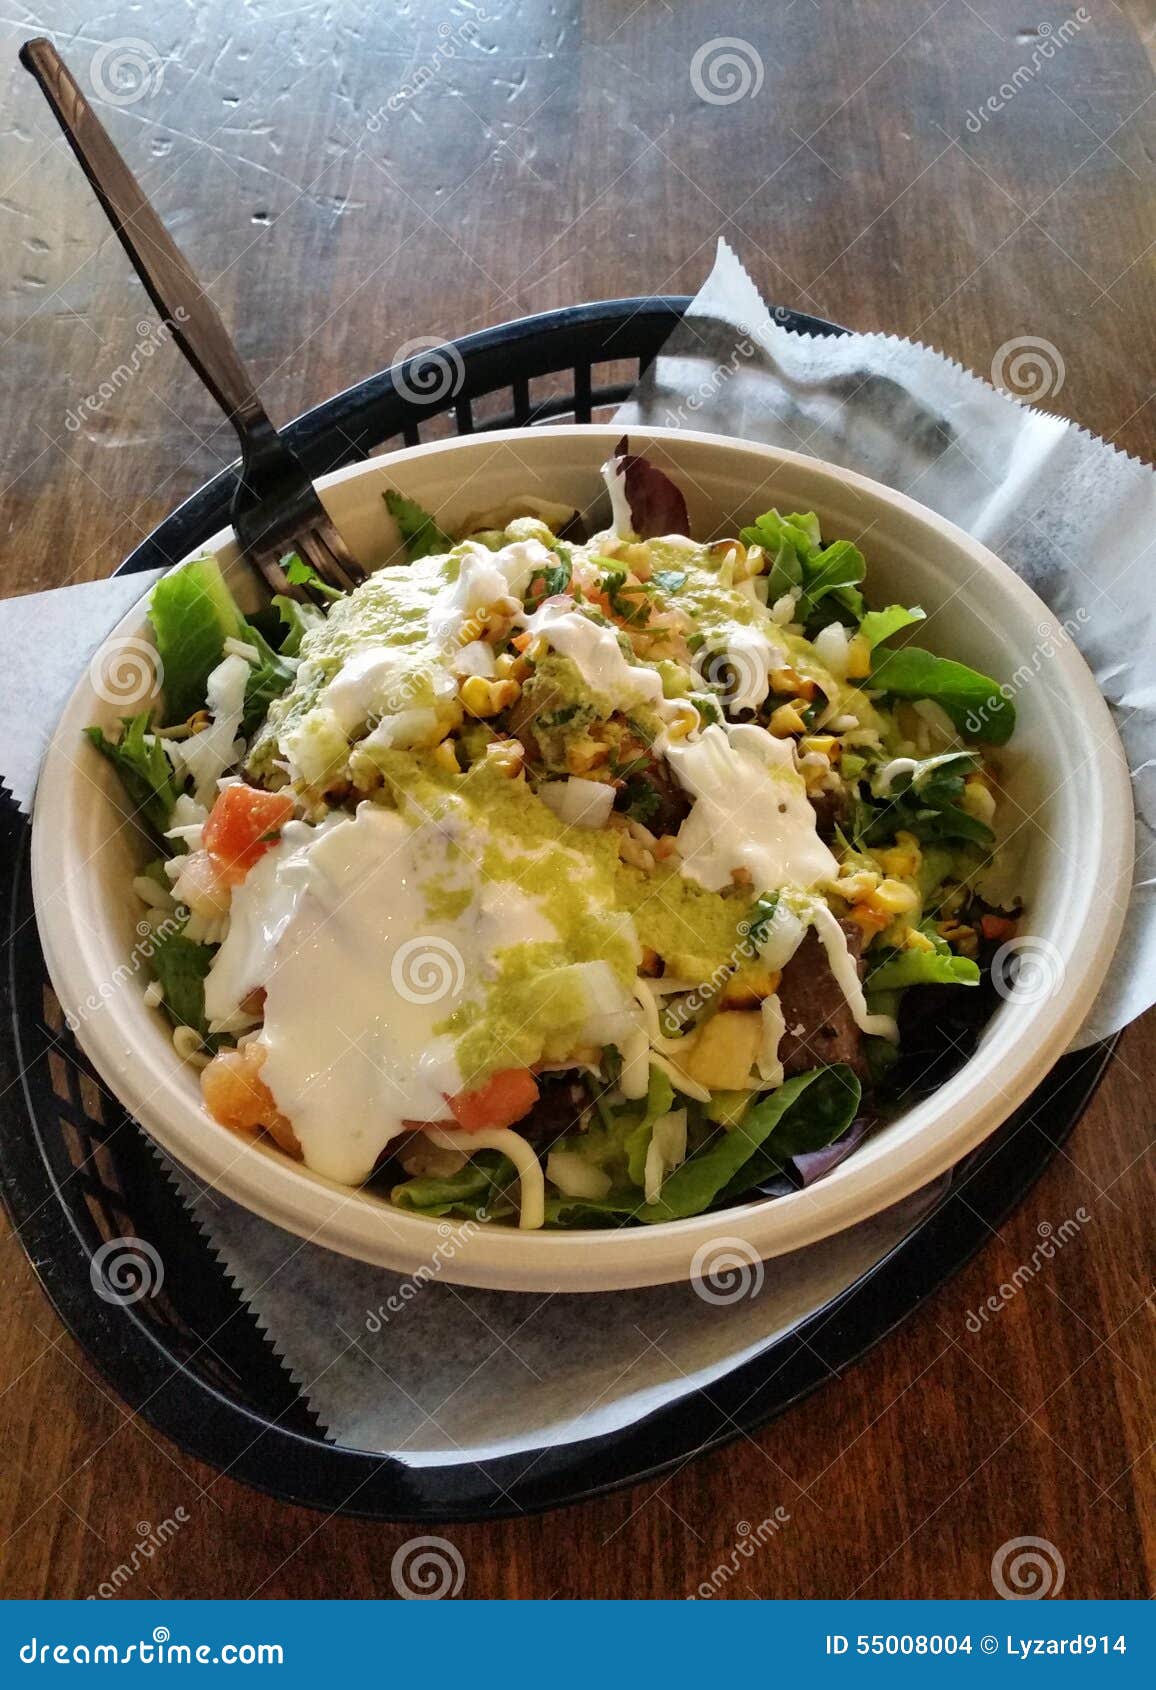 Mexican Burrito Bowl Salad stock photo. Image of dinner - 55008004